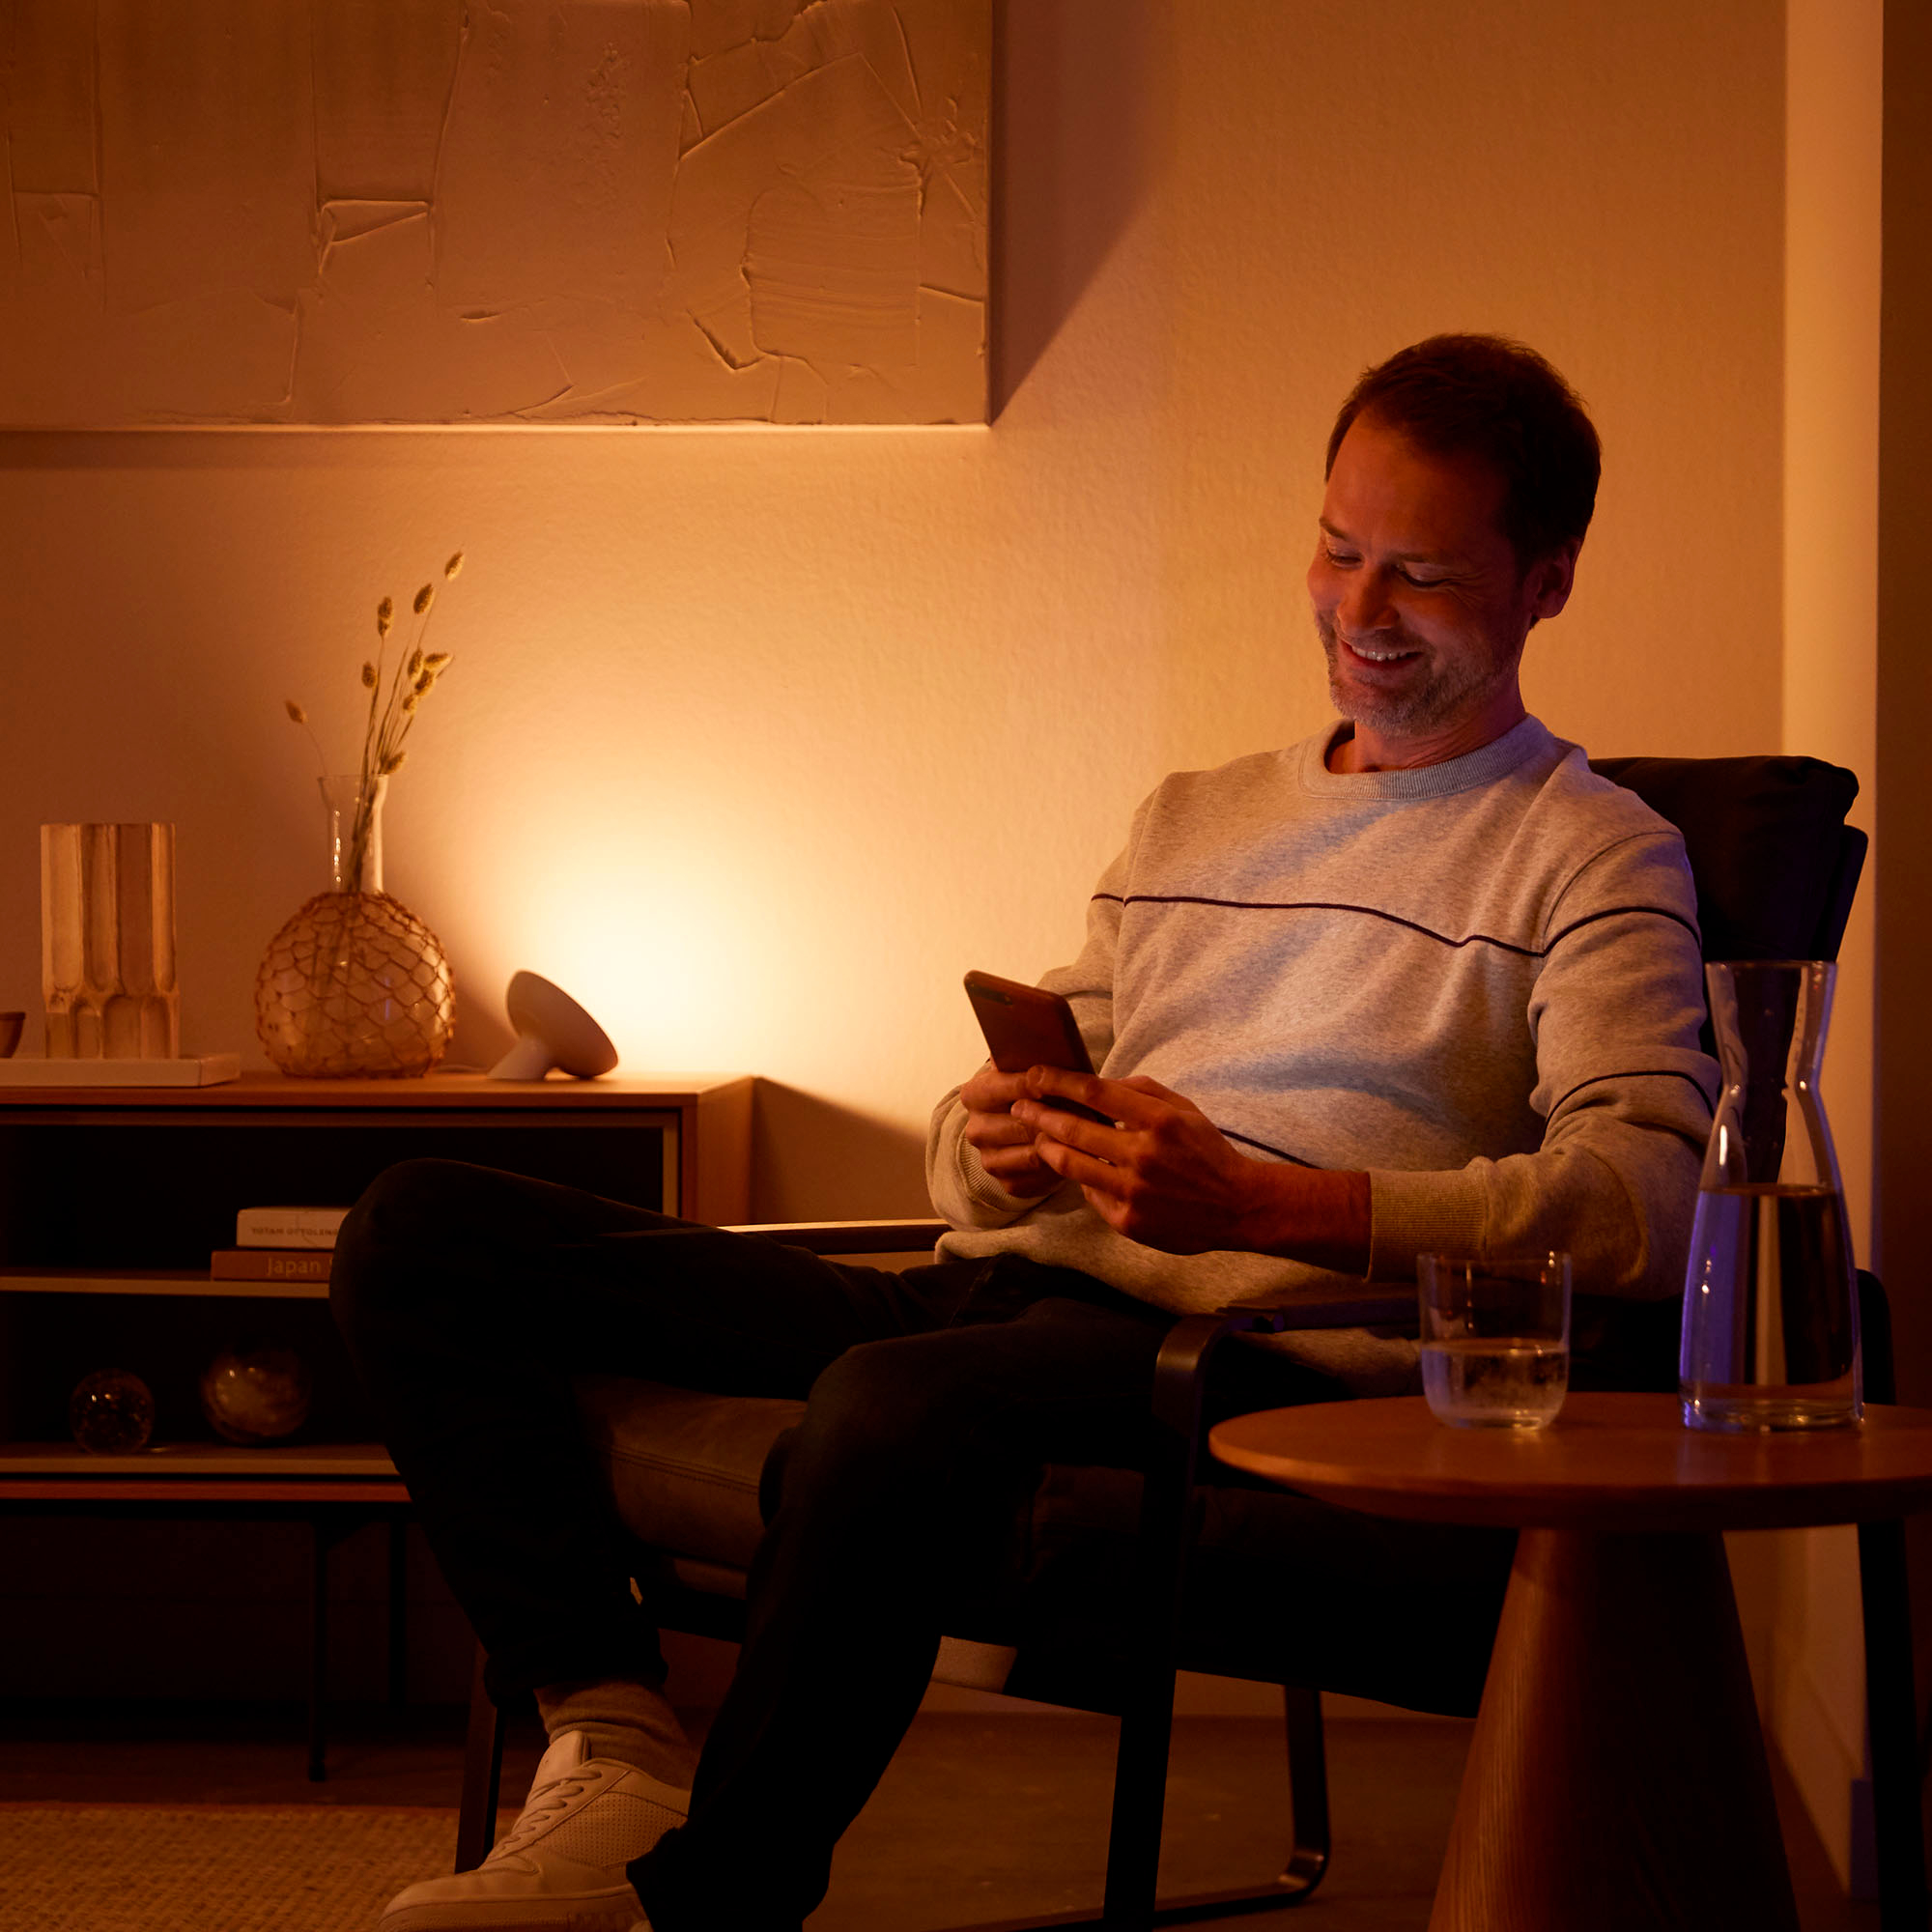 Philips Hue White and Color Ambiance Lampe de table Go 300 lm